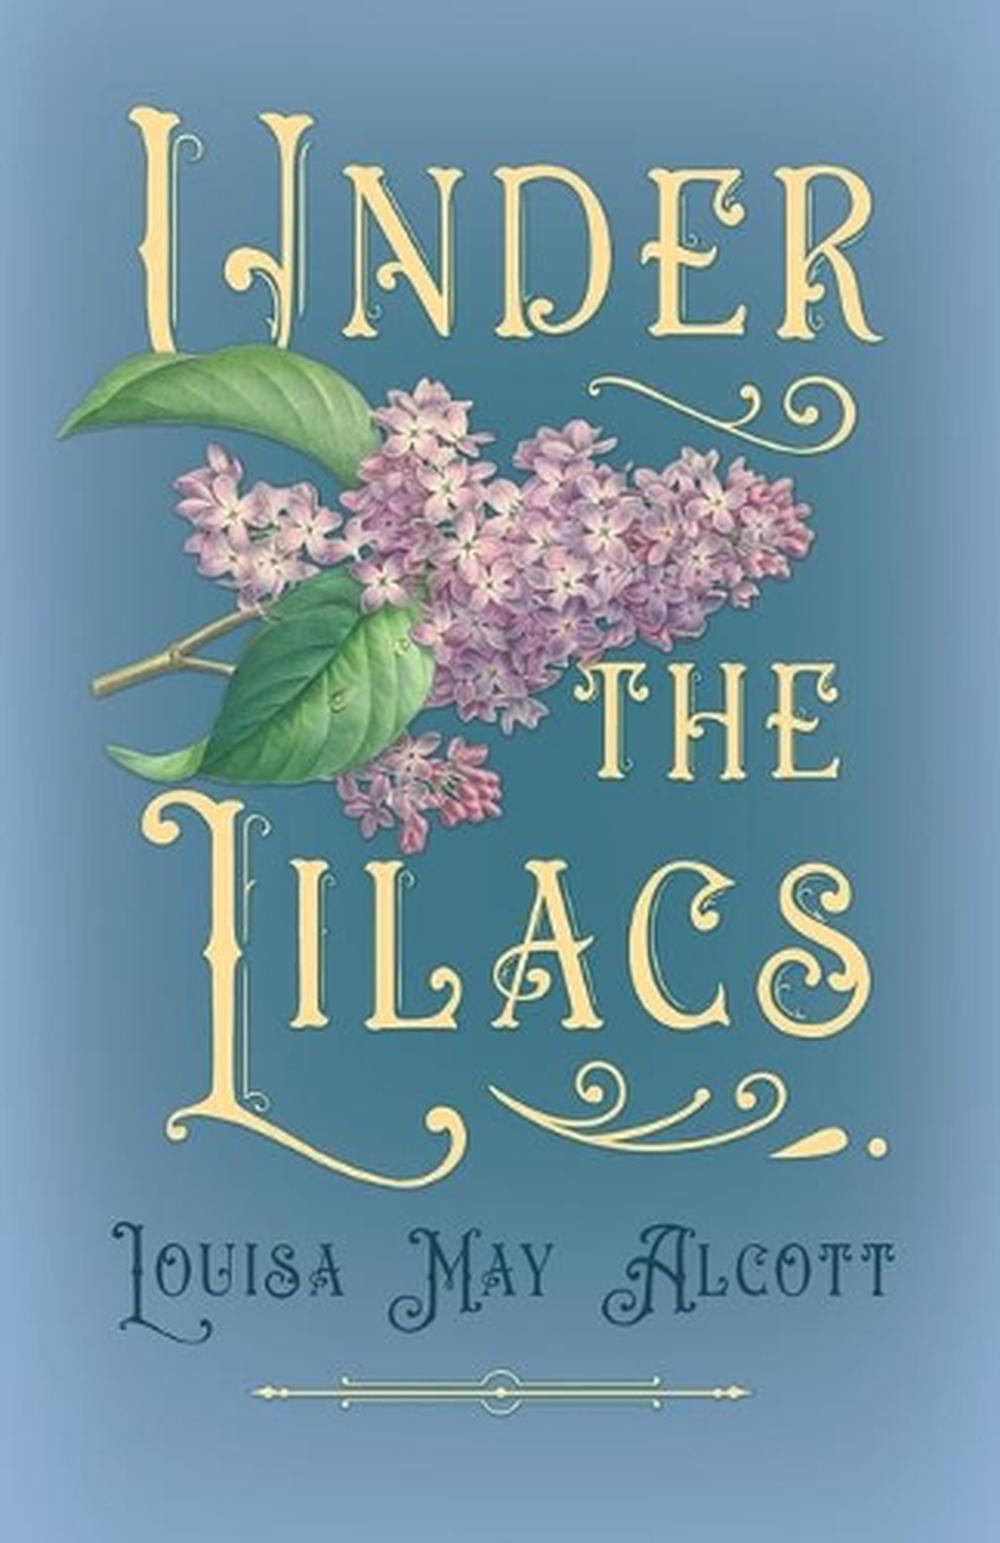 Under the Lilacs by Louisa May Alcott (English) Paperback Book Free Shipping! 9781446522011 | eBay